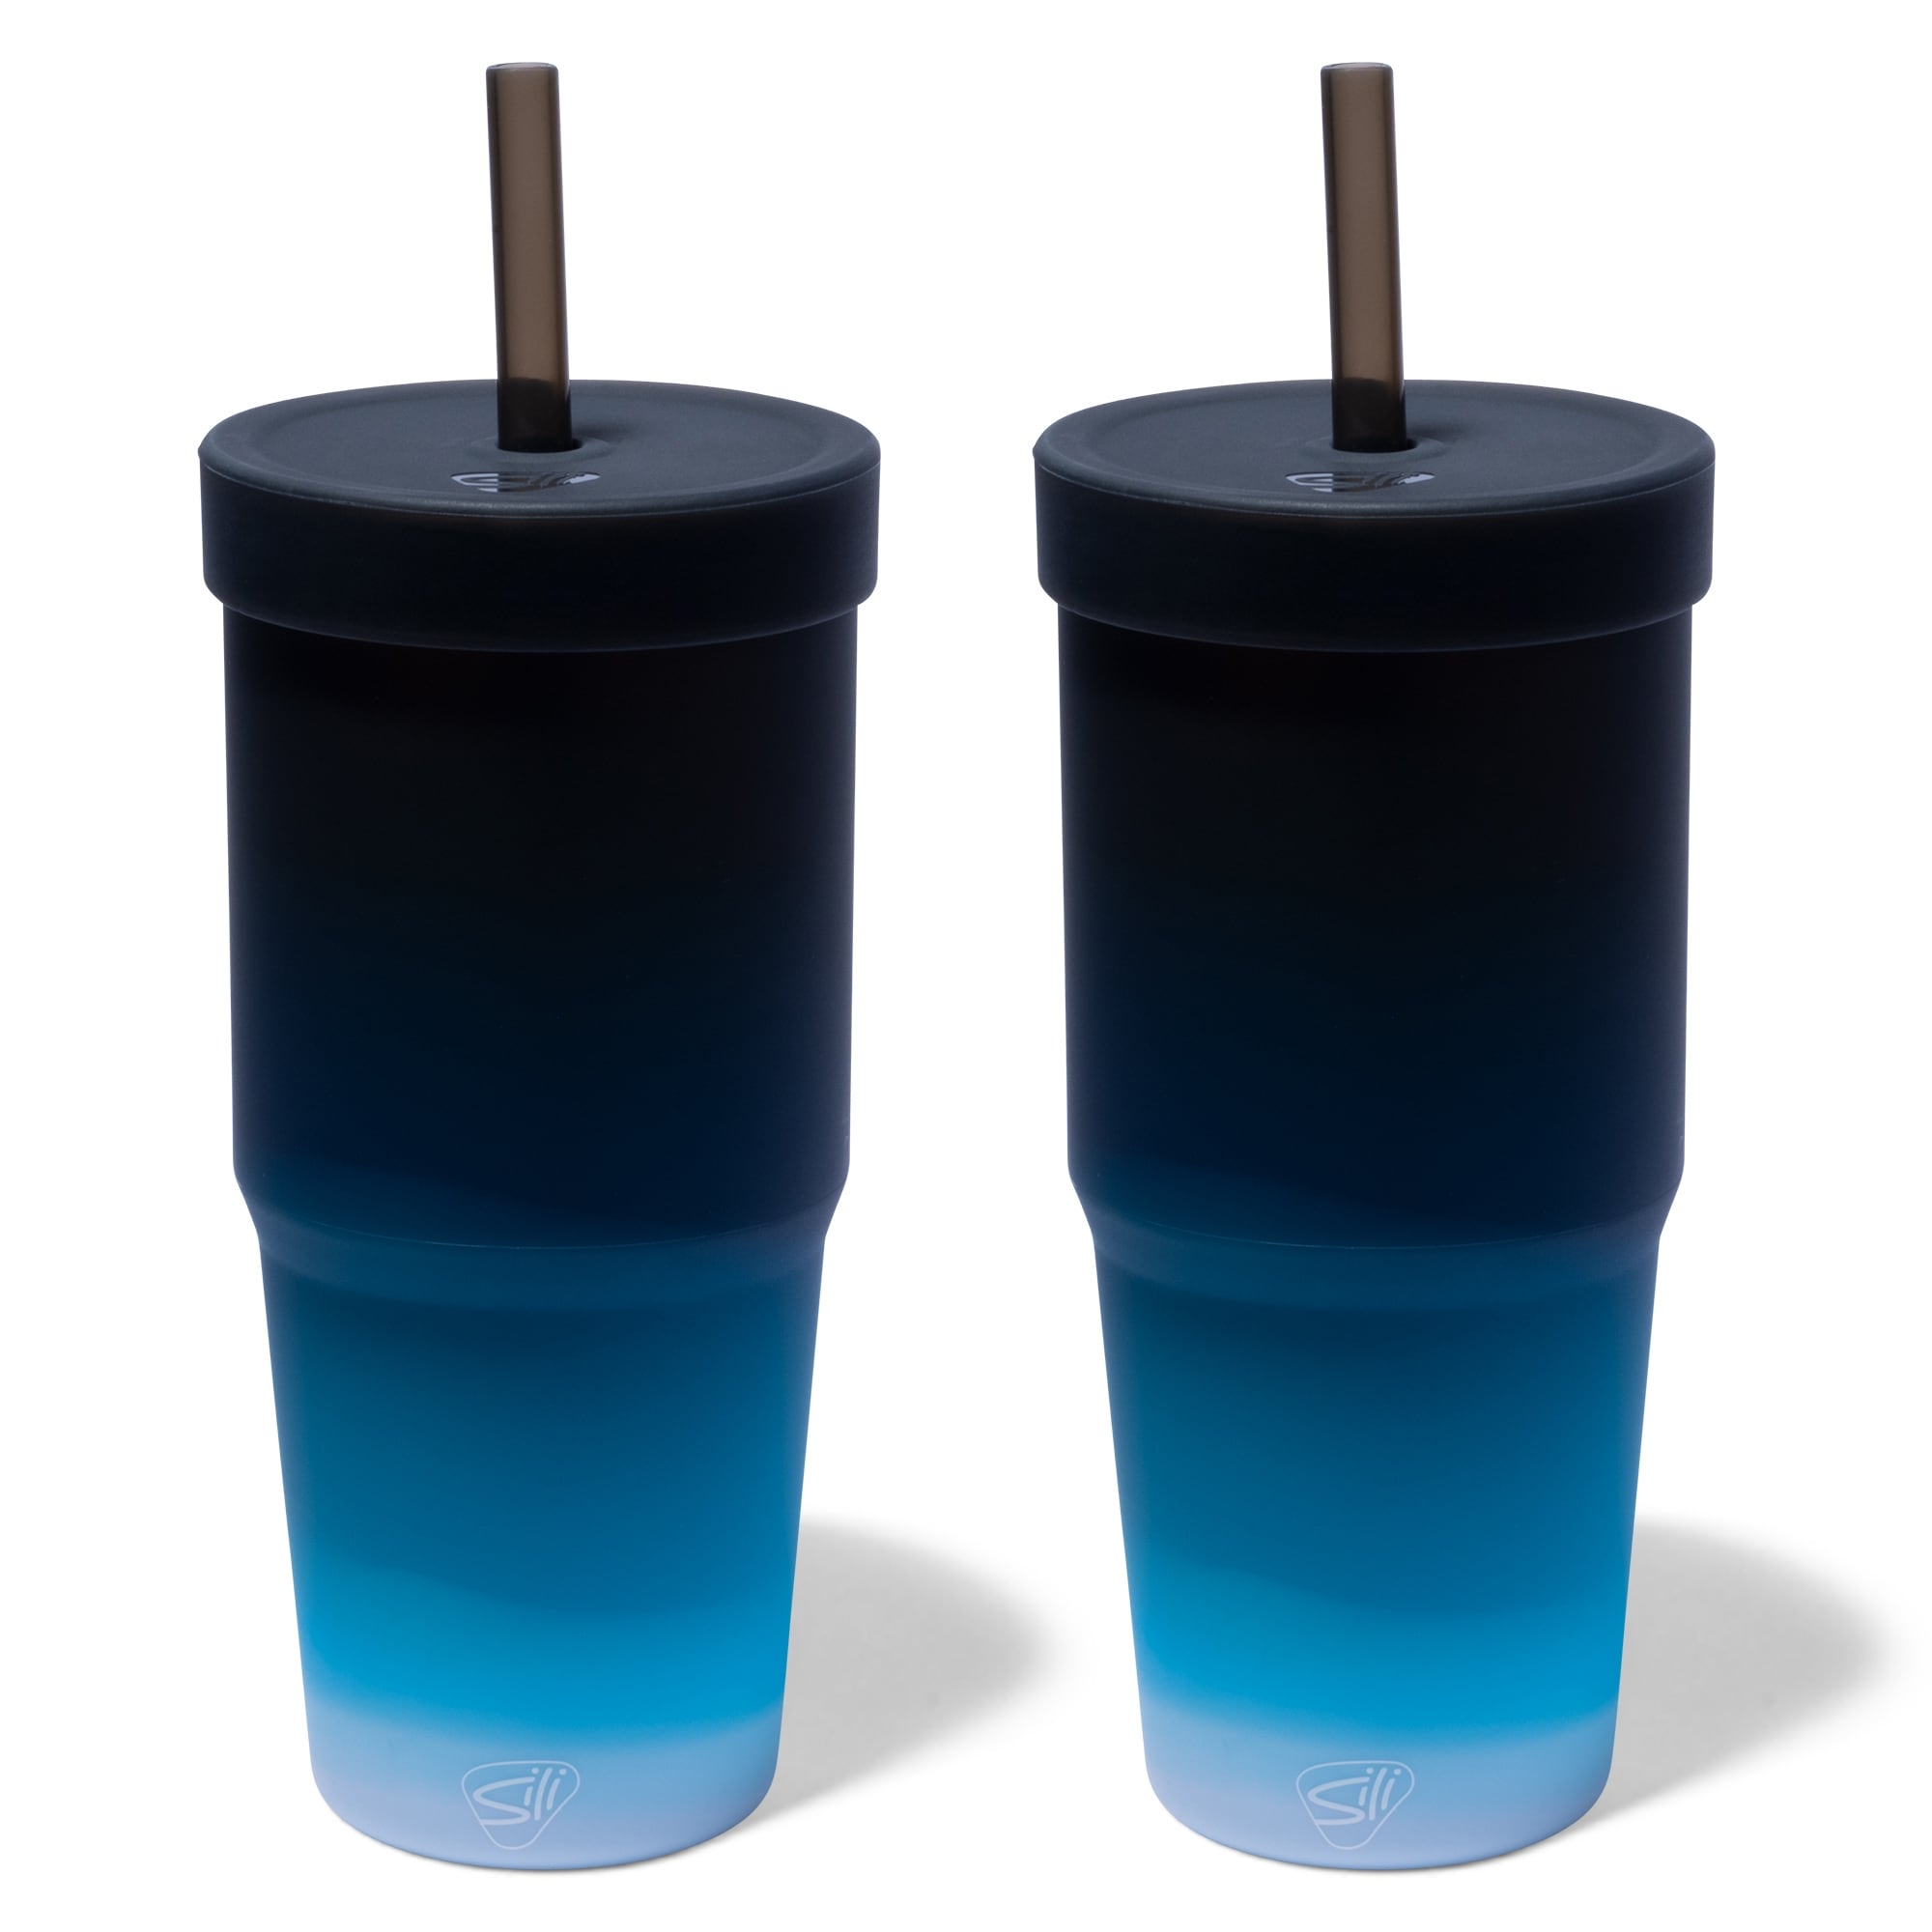 https://ak1.ostkcdn.com/images/products/is/images/direct/0a5d683fb892cd3d09fe8dbeeecc029b0ab22de2/Silipint%3A-Silicone-32oz-Straw-Tumblers%3A-2-Pack-Moon-Beam---Reusable-Unbreakable-Cup%2C-Flexible%2C-Hot-Cold%2C-Airtight-Lid.jpg